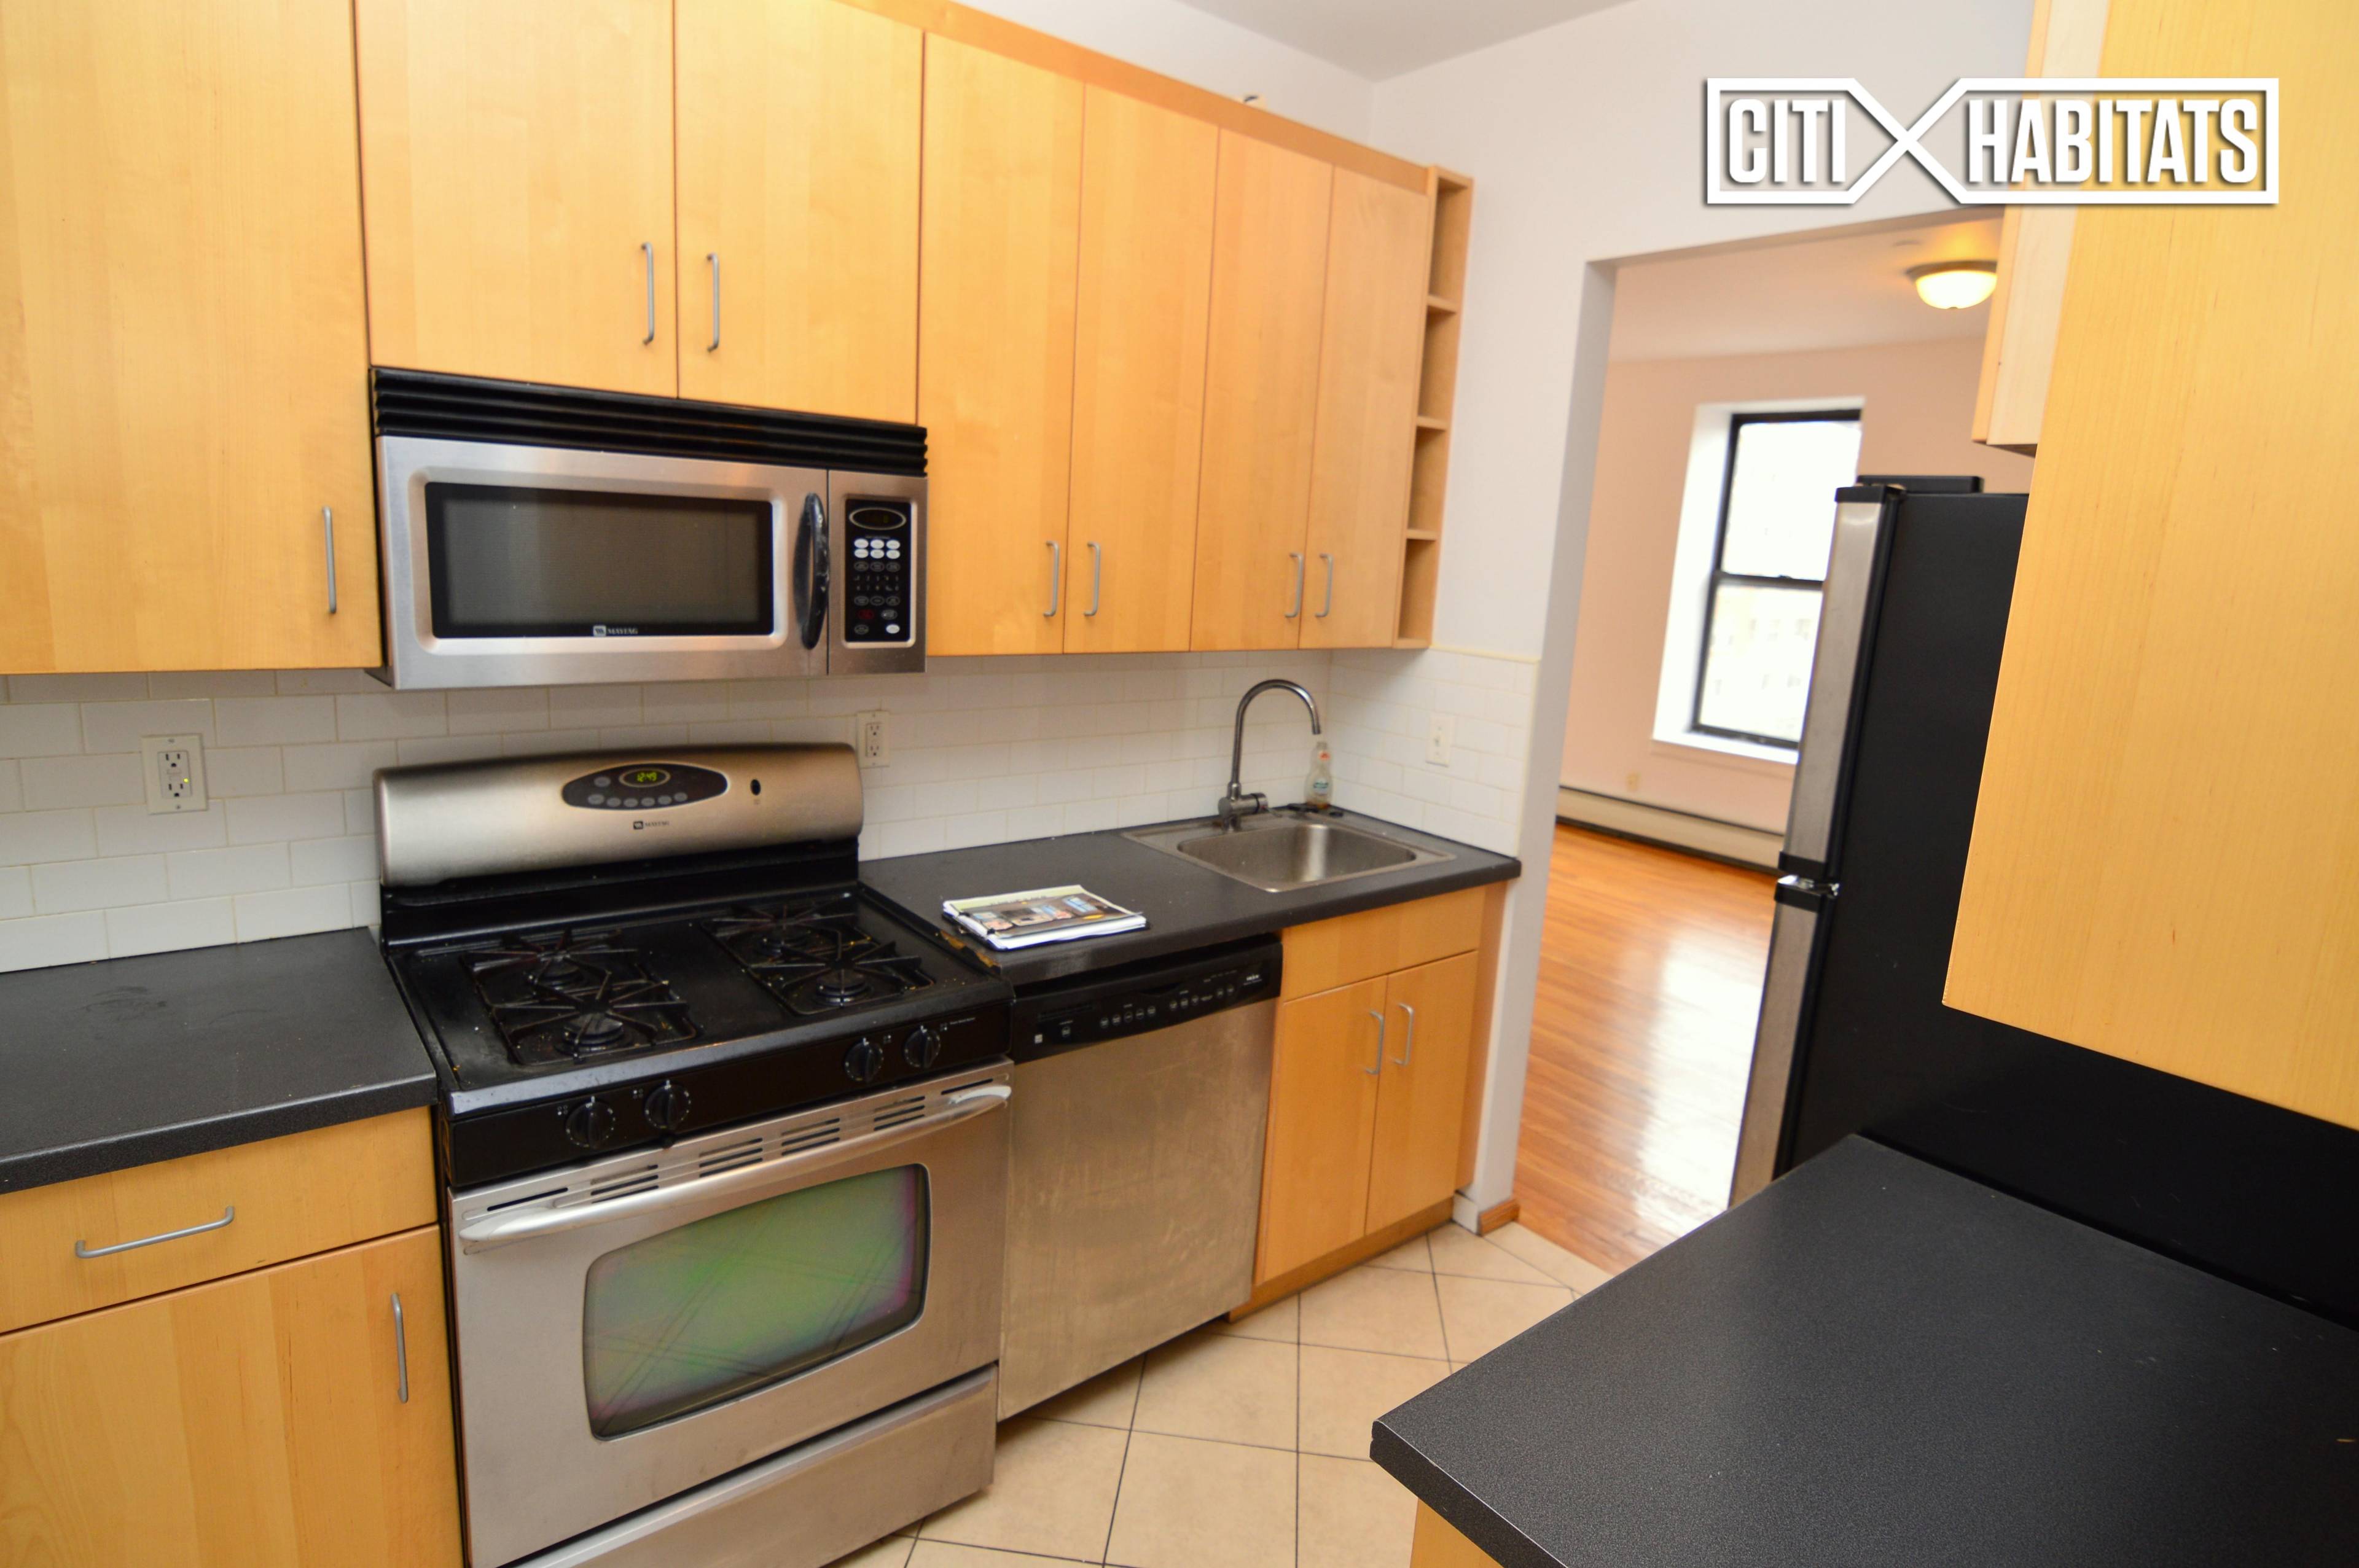 Large, renovated 1200 square foot duplex 2 bedroom 2 full bath apartment in booming East Harlem features, tiled kitchen with stainless steel appliances including dishwasher and microwave, extra tall cabinets ...